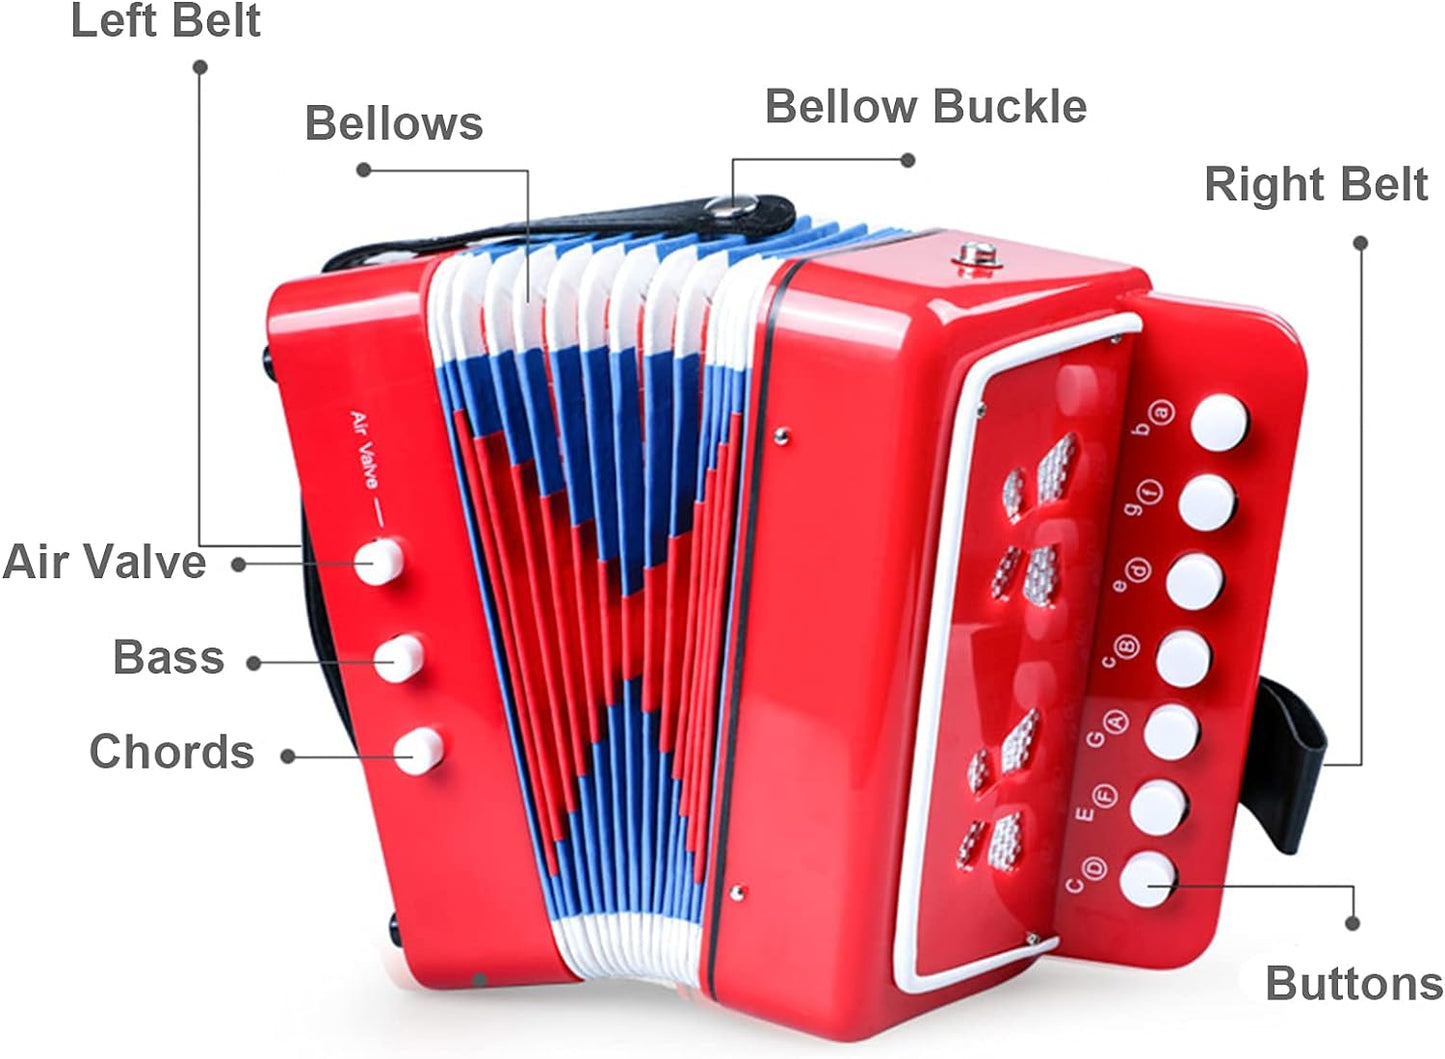 Kids Accordion, 7.5 x 4.5 x 7.5 inches, Red